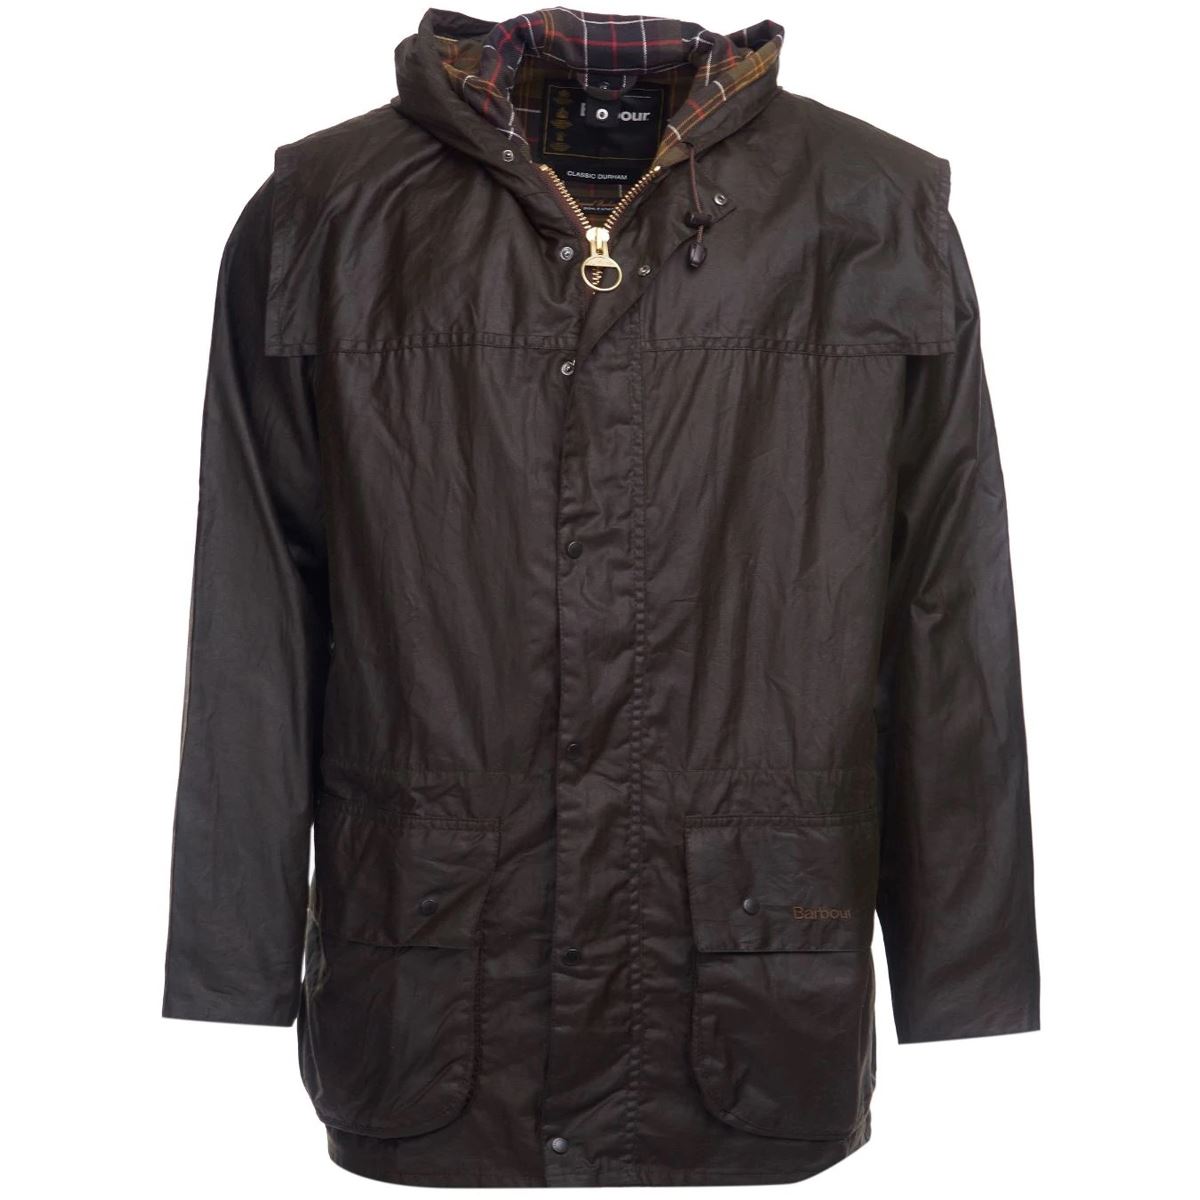 Can the Barbour Durham Jacket be worn all year round?